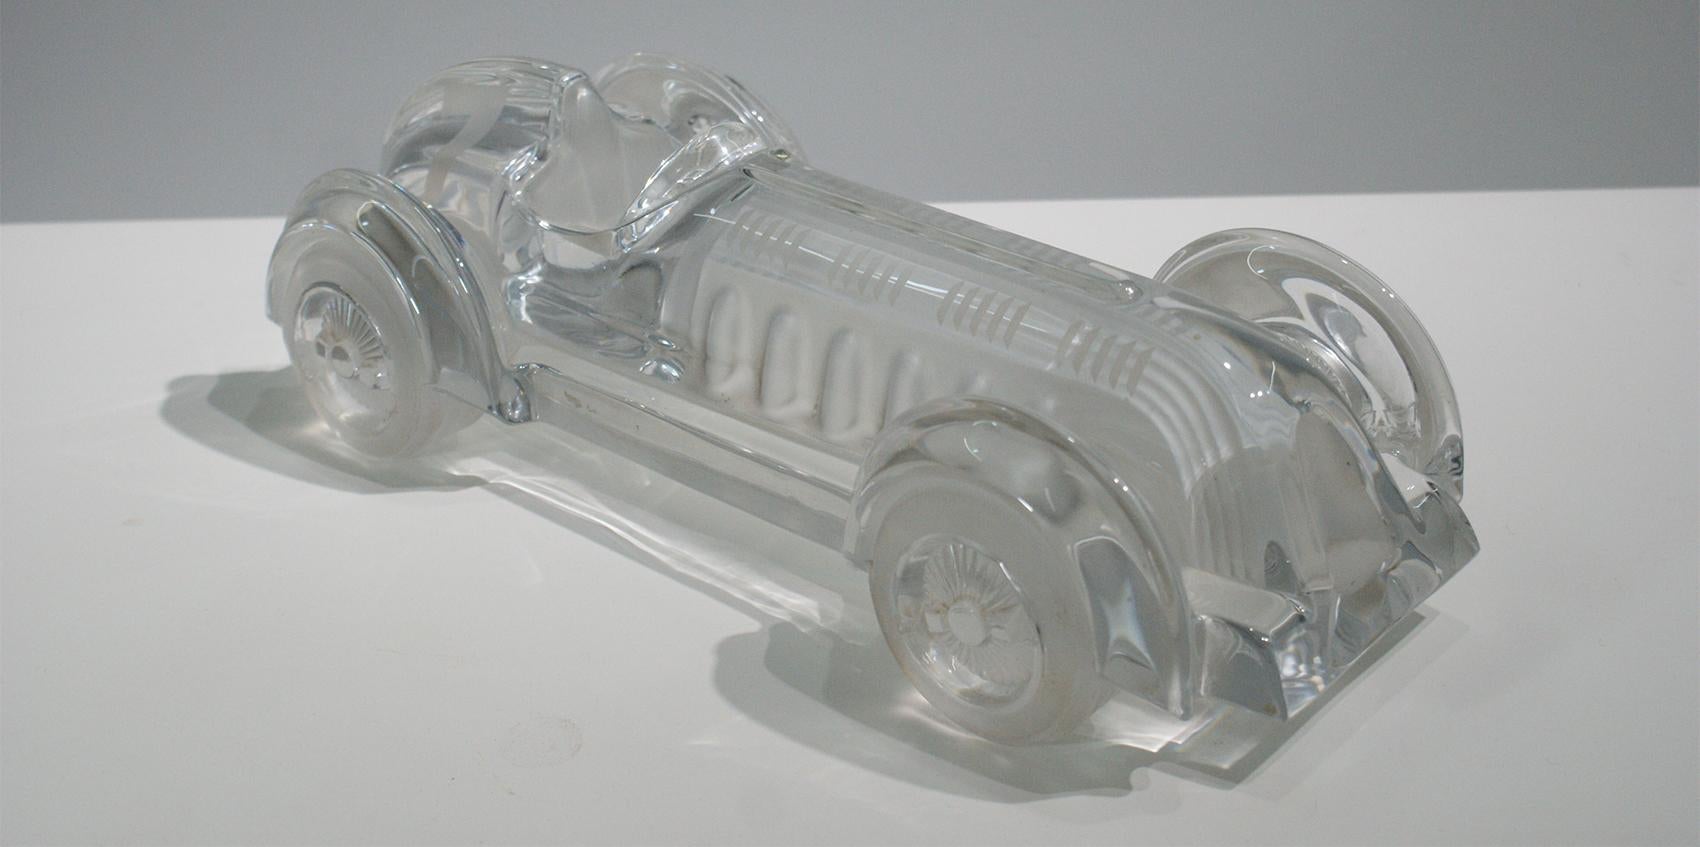 Late 20th Century Signed Daum France, Crystal Sculpture of Vintage Race Car in Limited Edition